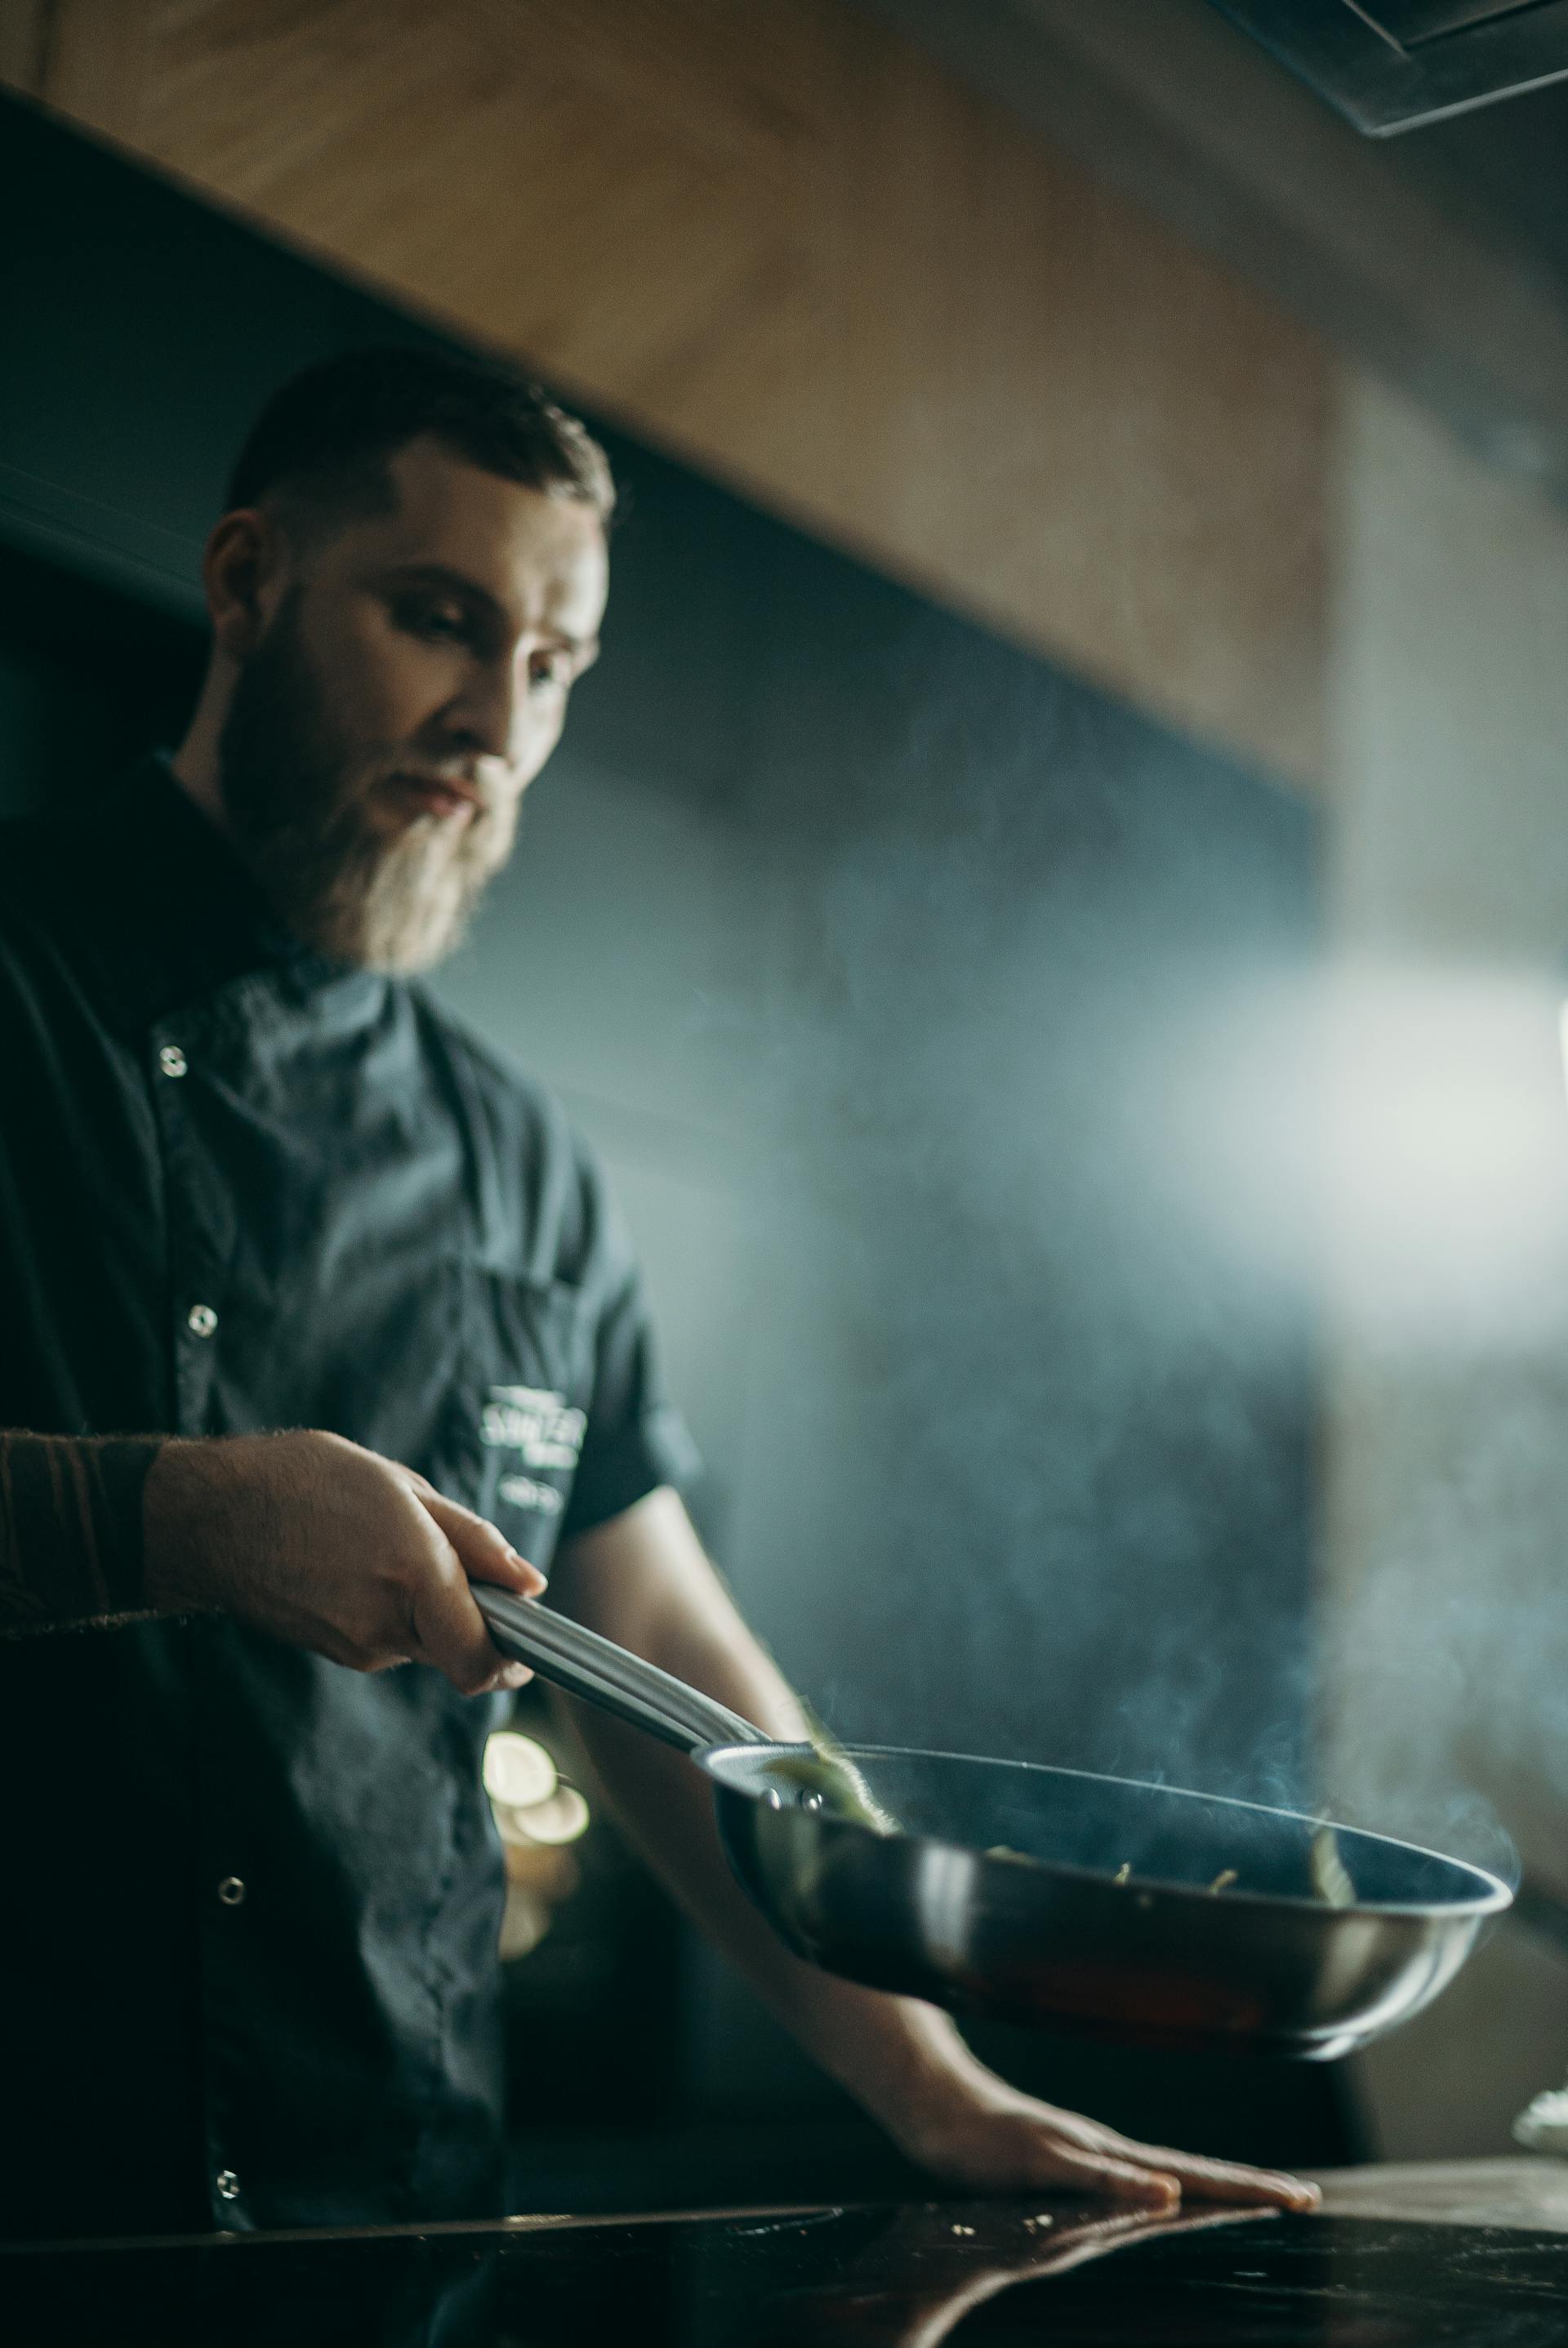 A man in the kitchen holding a pan | Source: Pexels